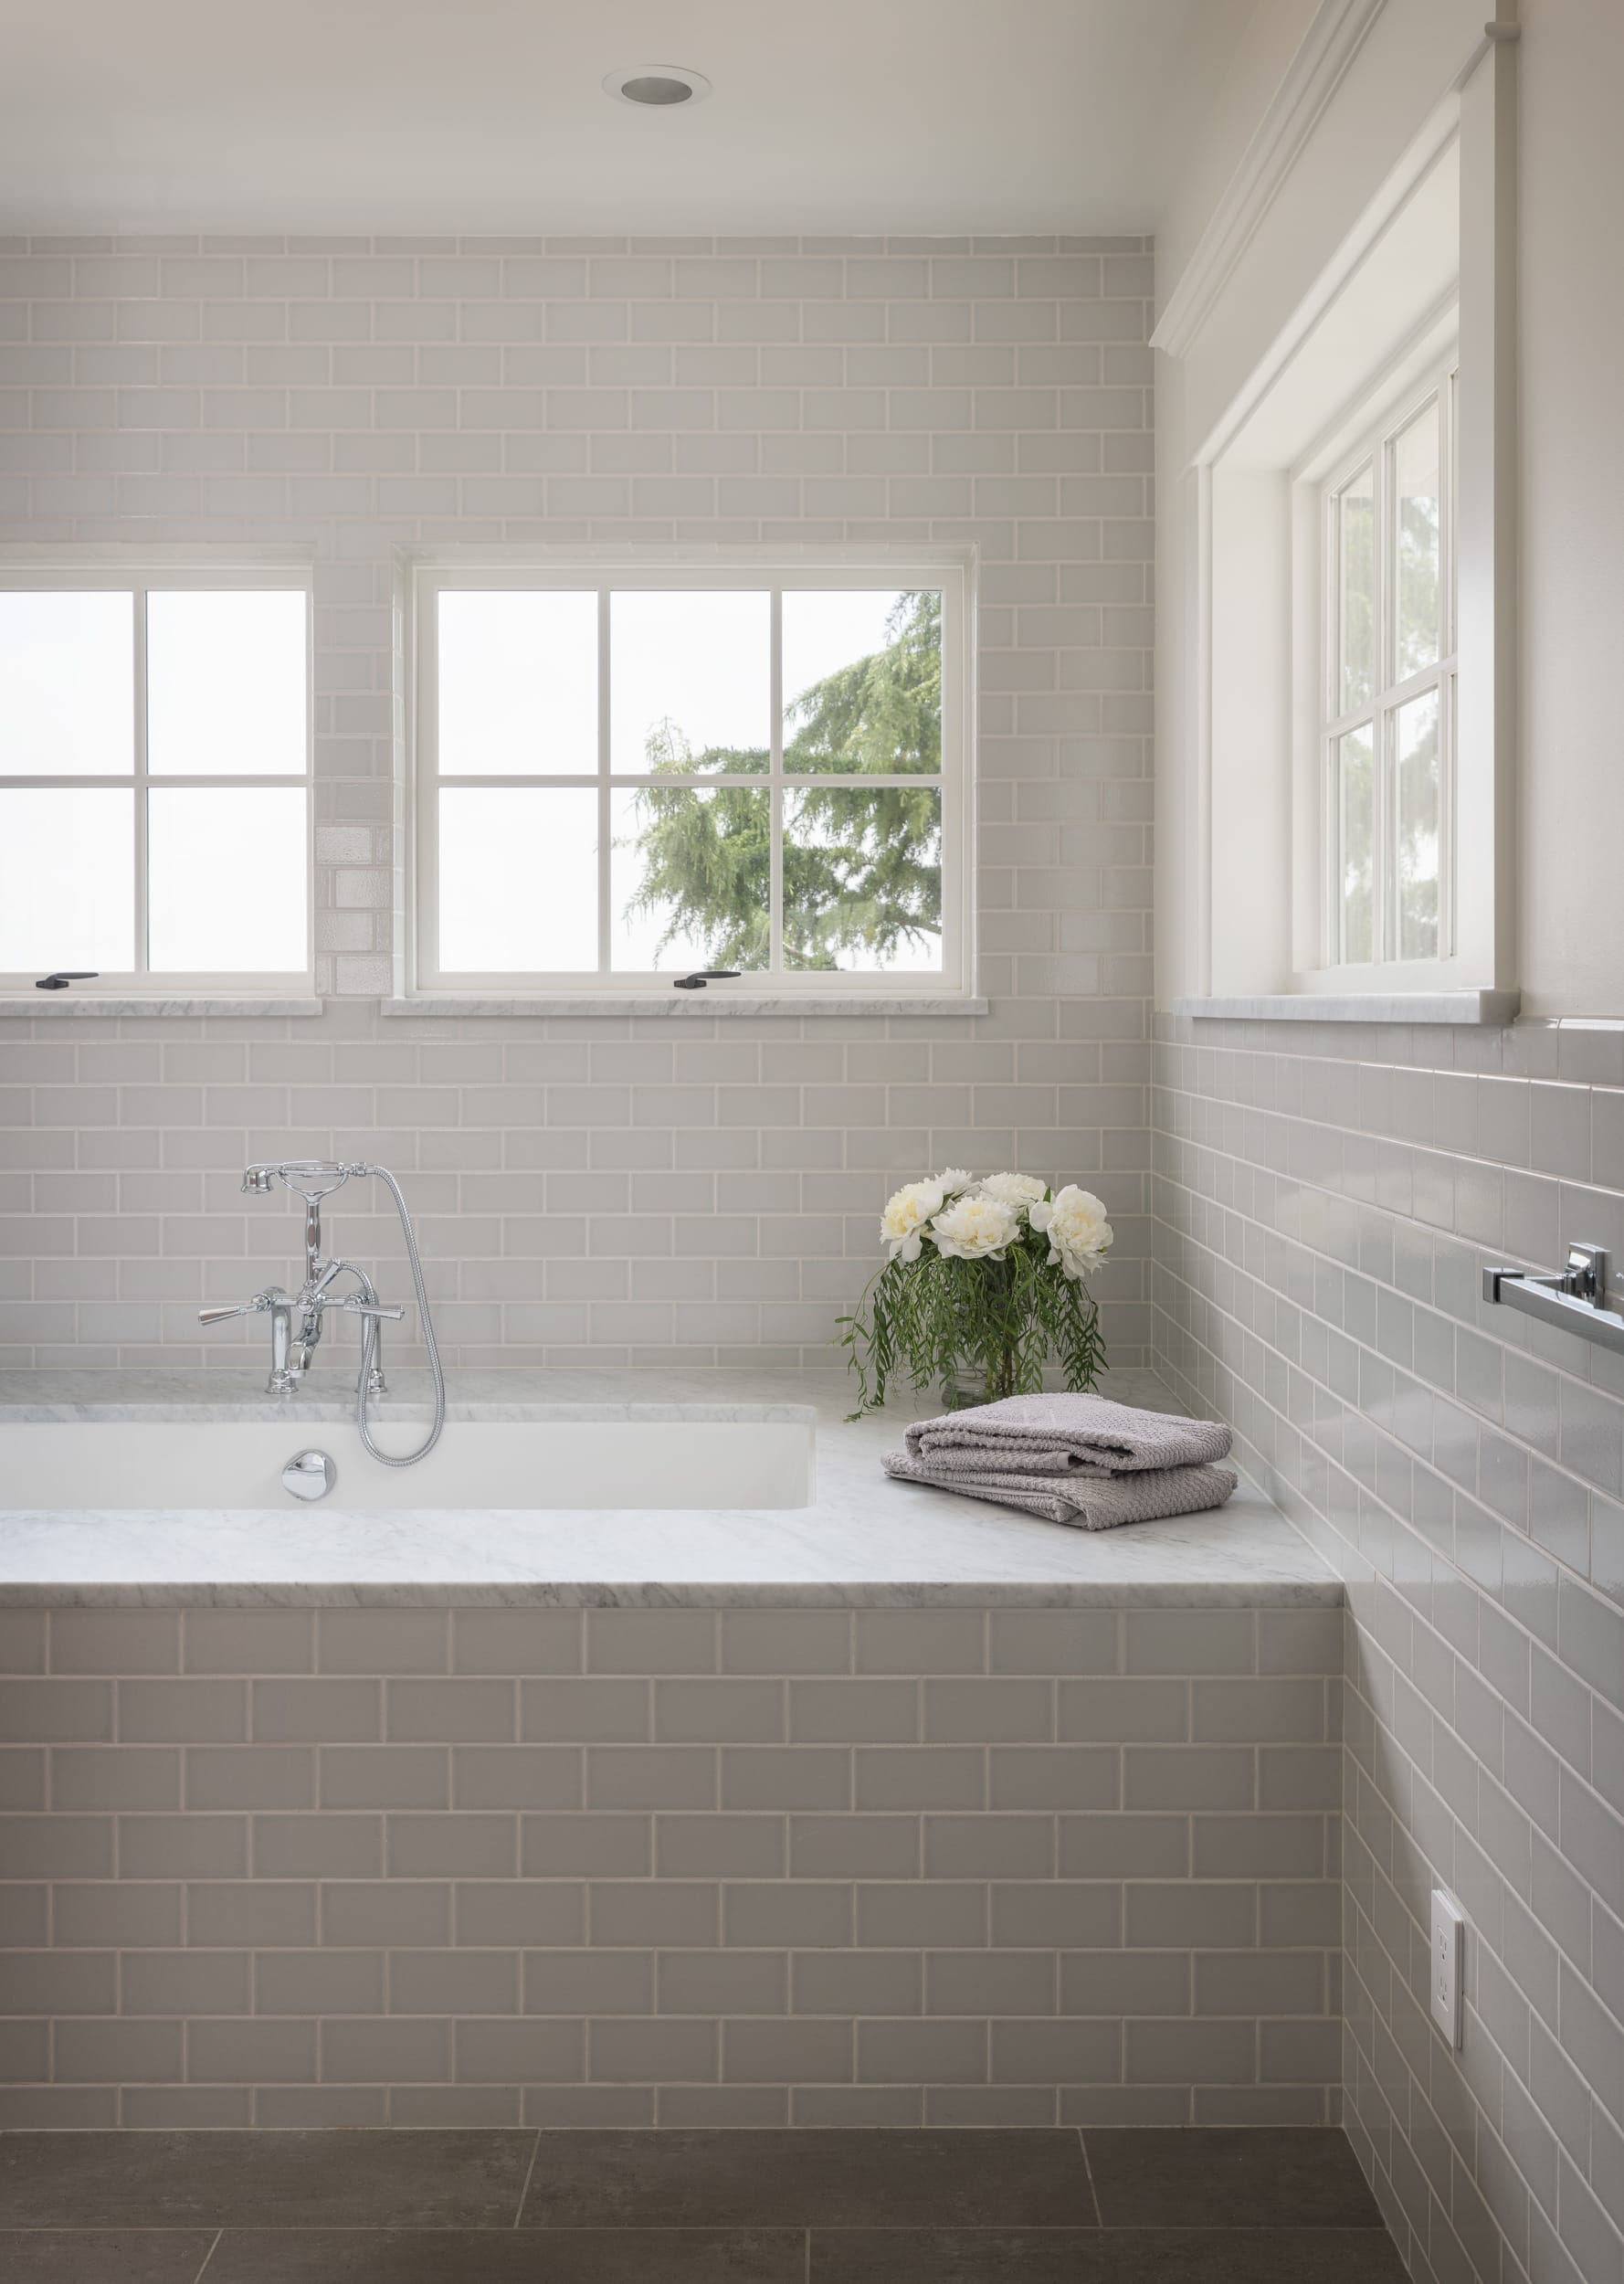 A modern bathroom with white tiles, a tub, and two windows.